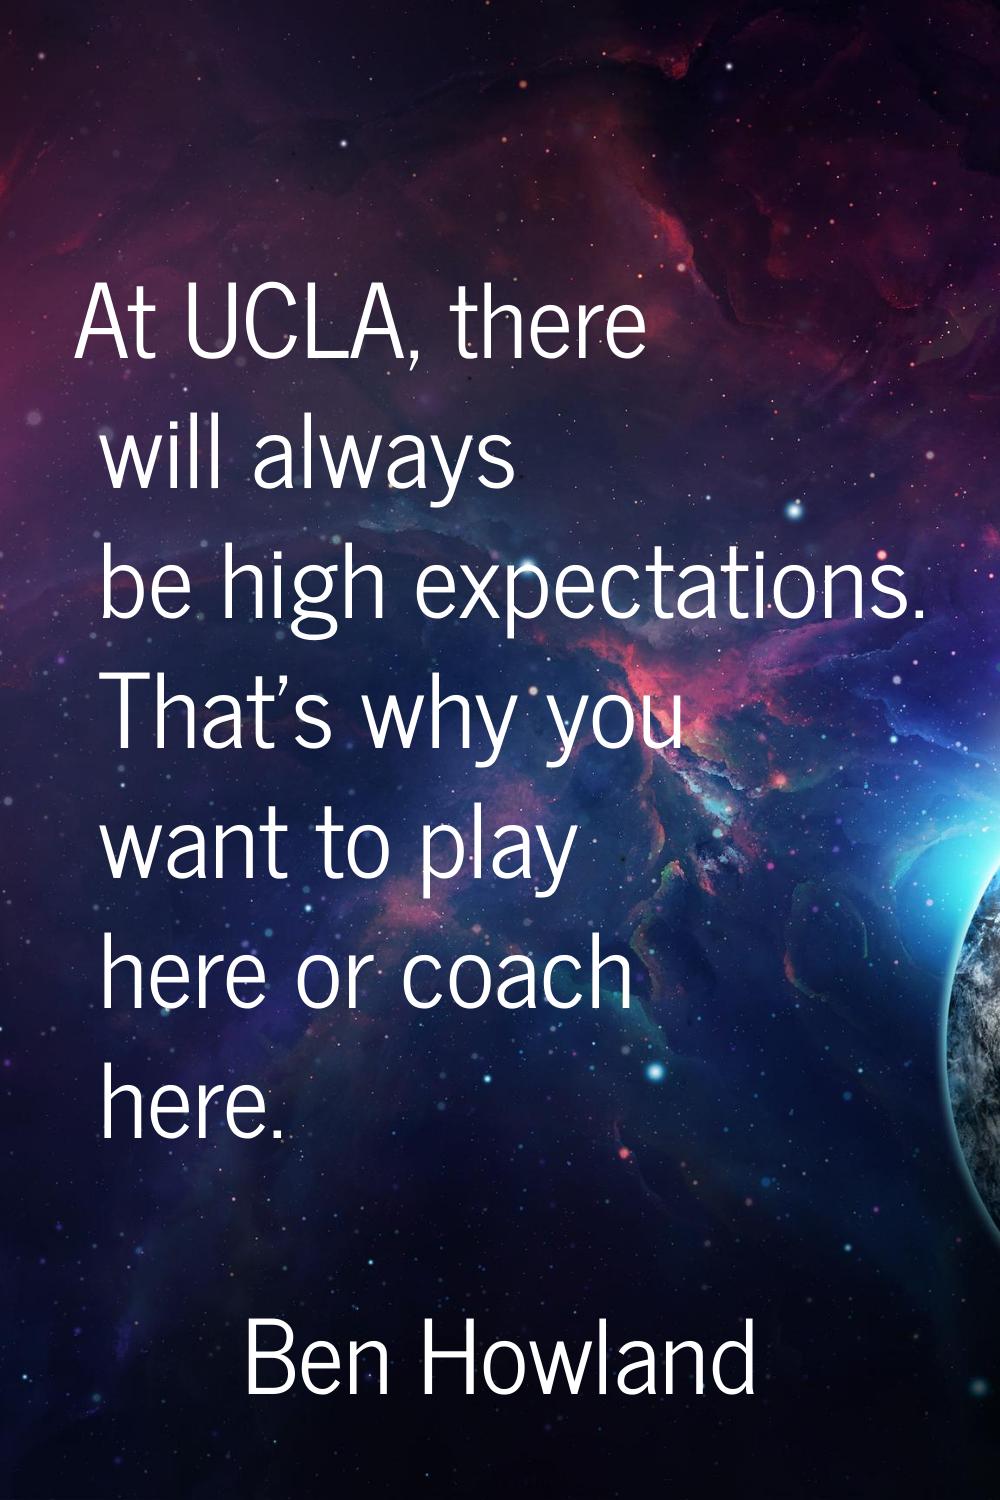 At UCLA, there will always be high expectations. That's why you want to play here or coach here.